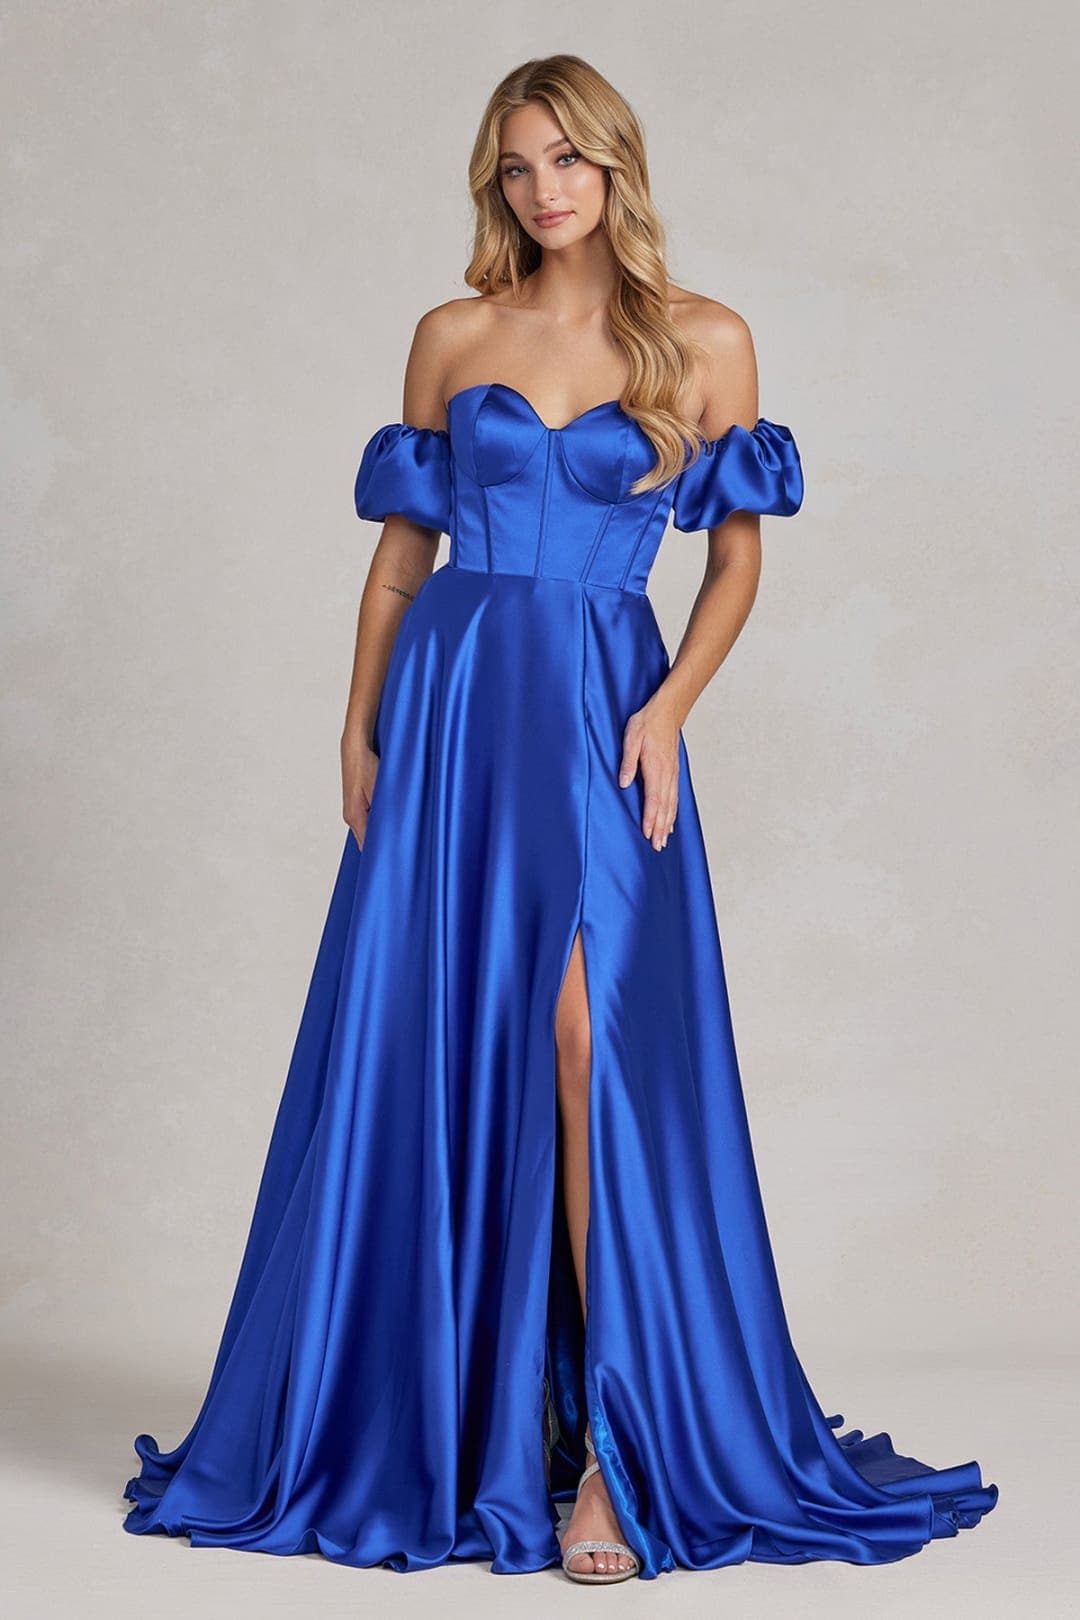 Simple Formal Gown - ROYAL BLUE / 00